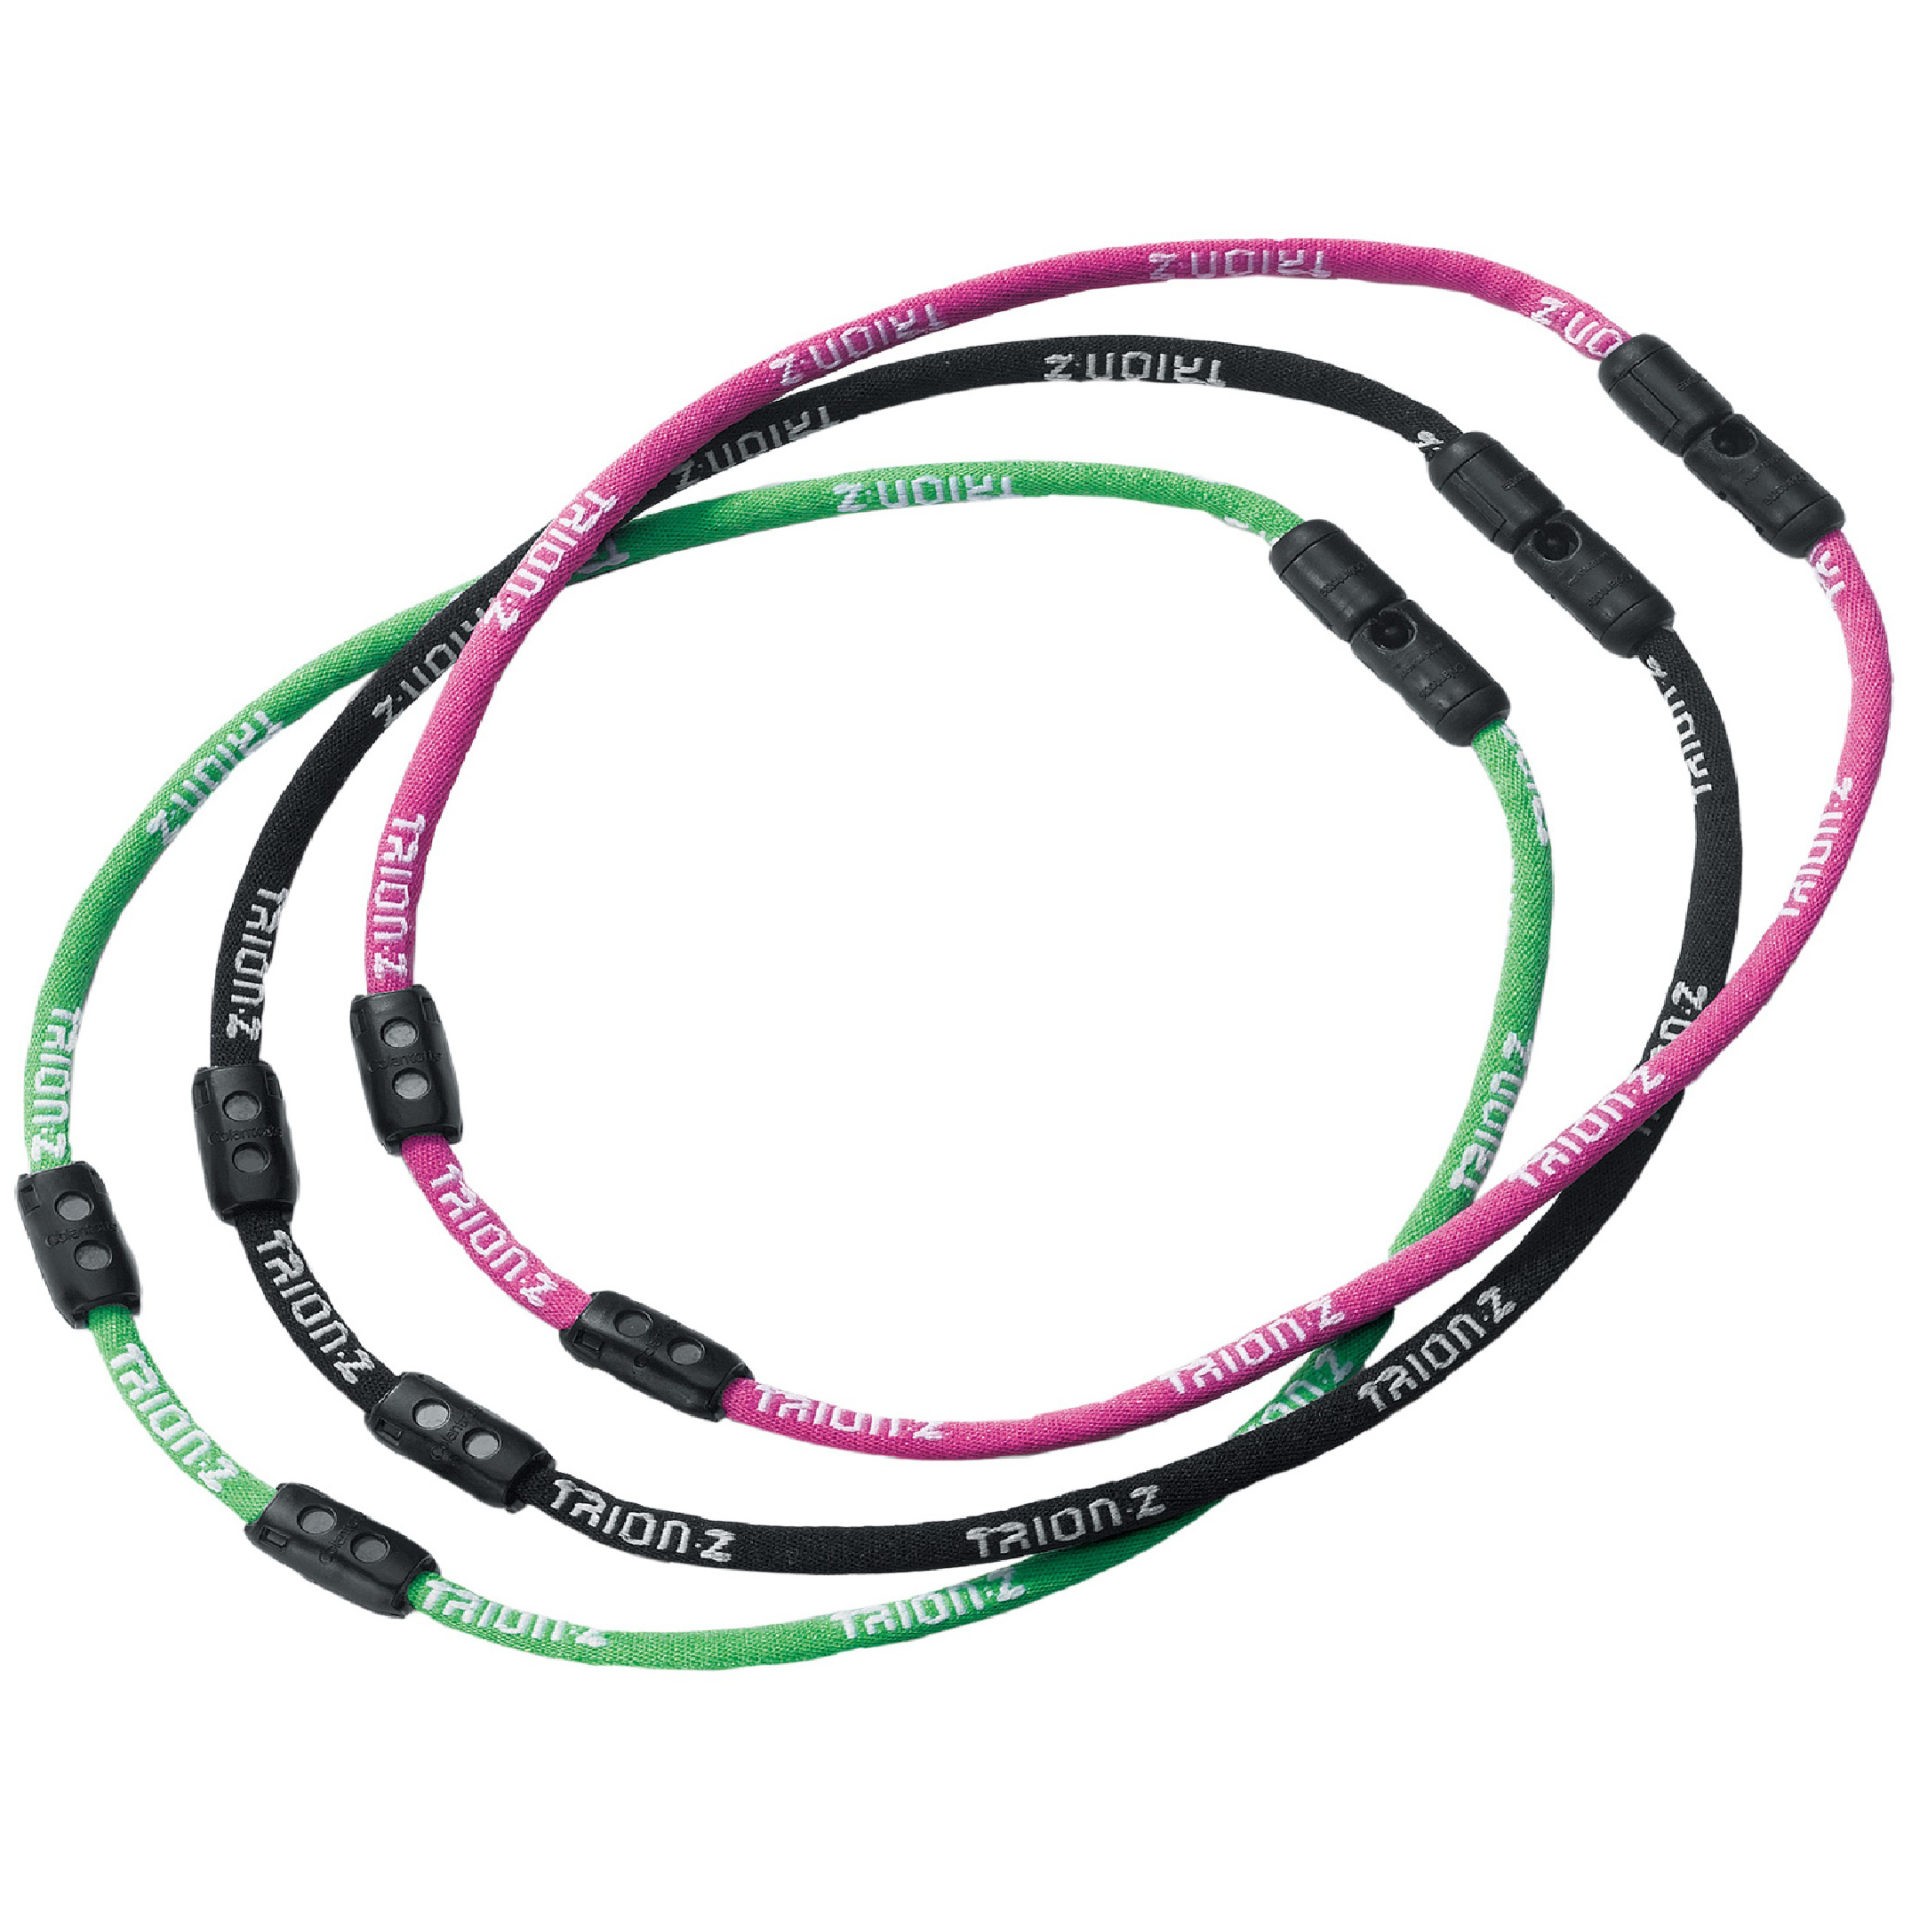 Trion Z Dual Loop Magnetic Wristband Bracelet Choose Size and Color 